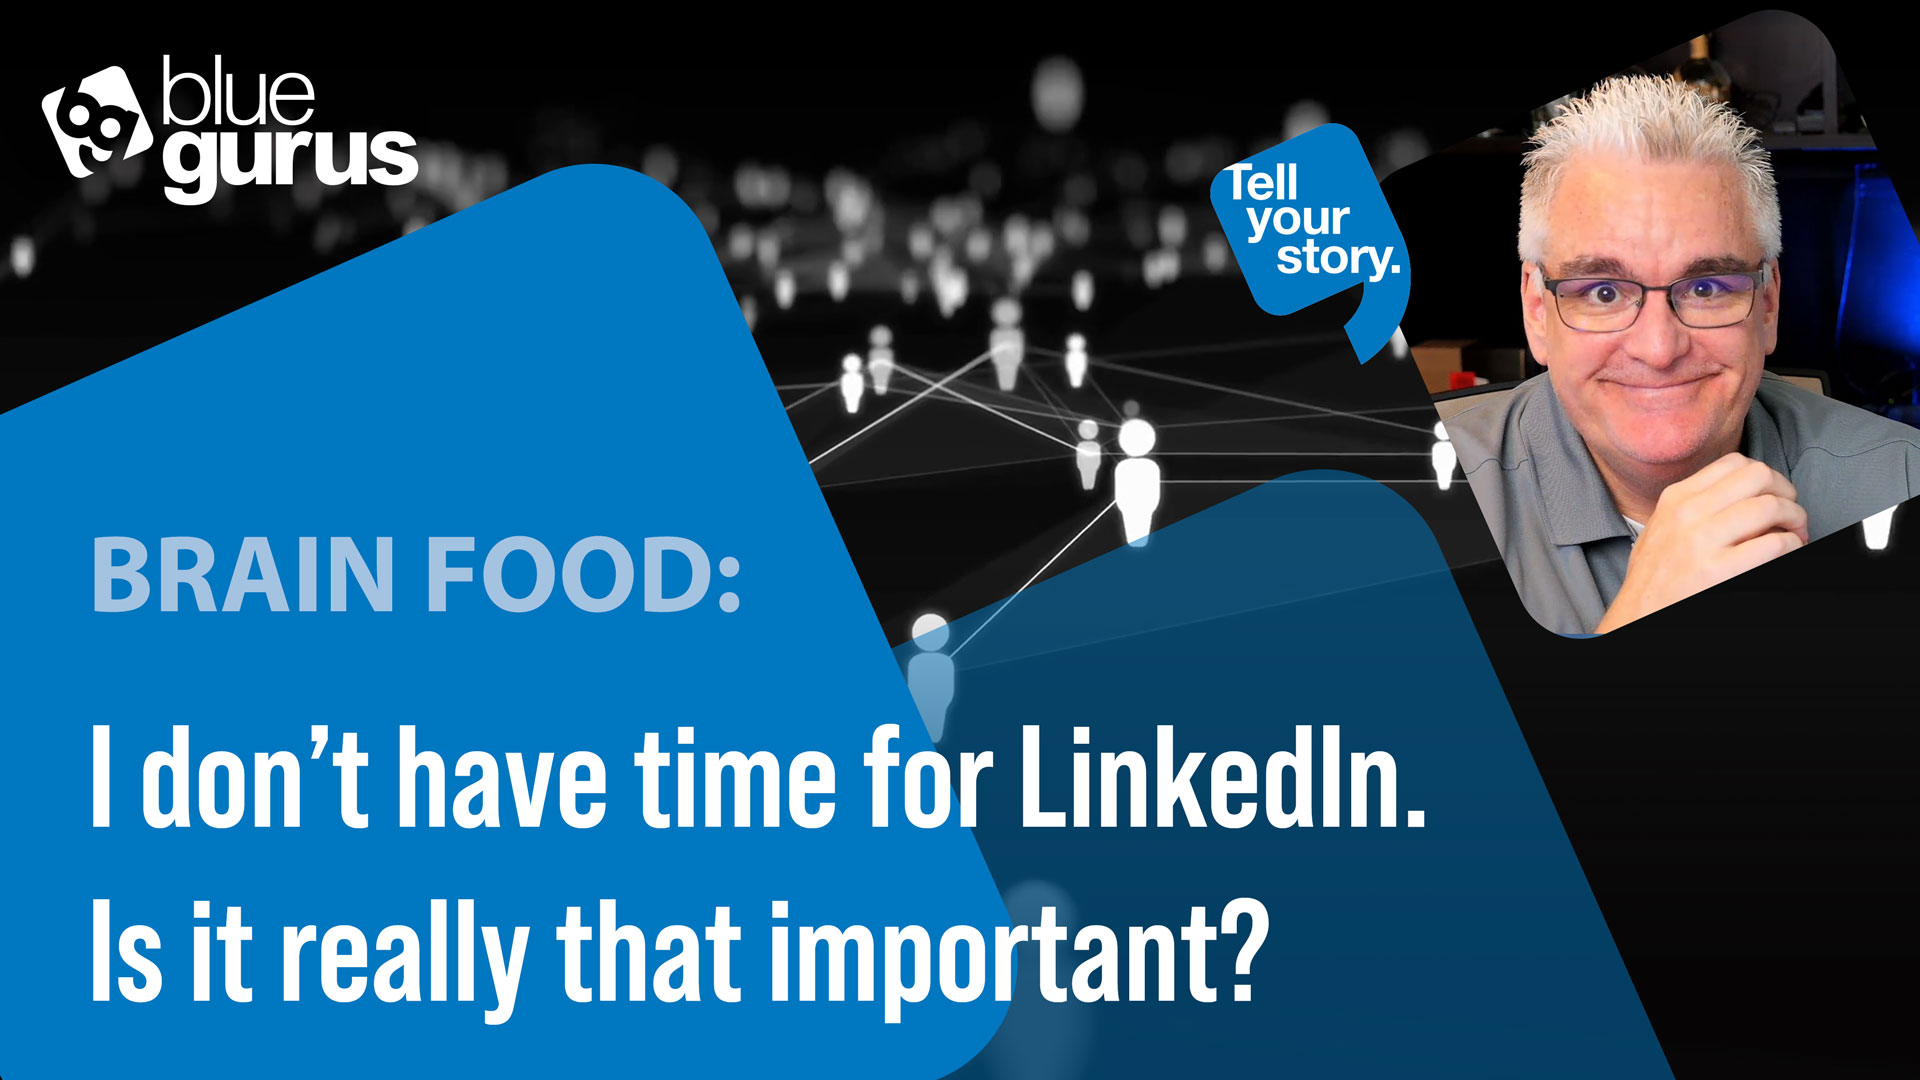 I don’t have time for LinkedIn. Is it really that important?